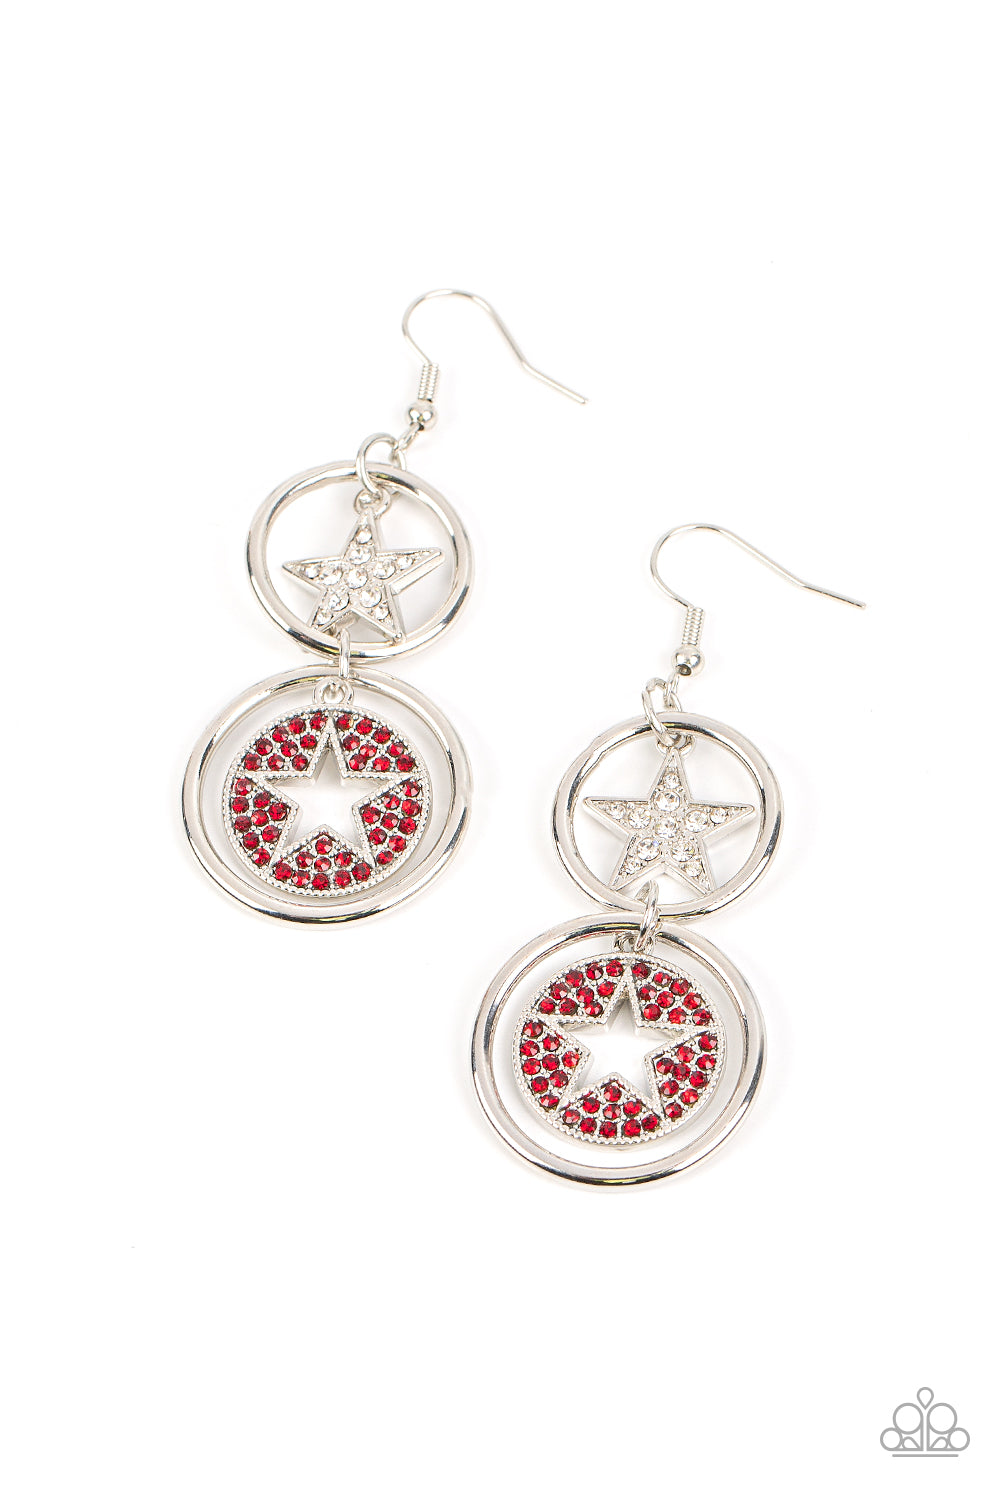 Paparazzi Liberty and SPARKLE for All Red Fishhook Earrings - P5WH-RDXX-159XX